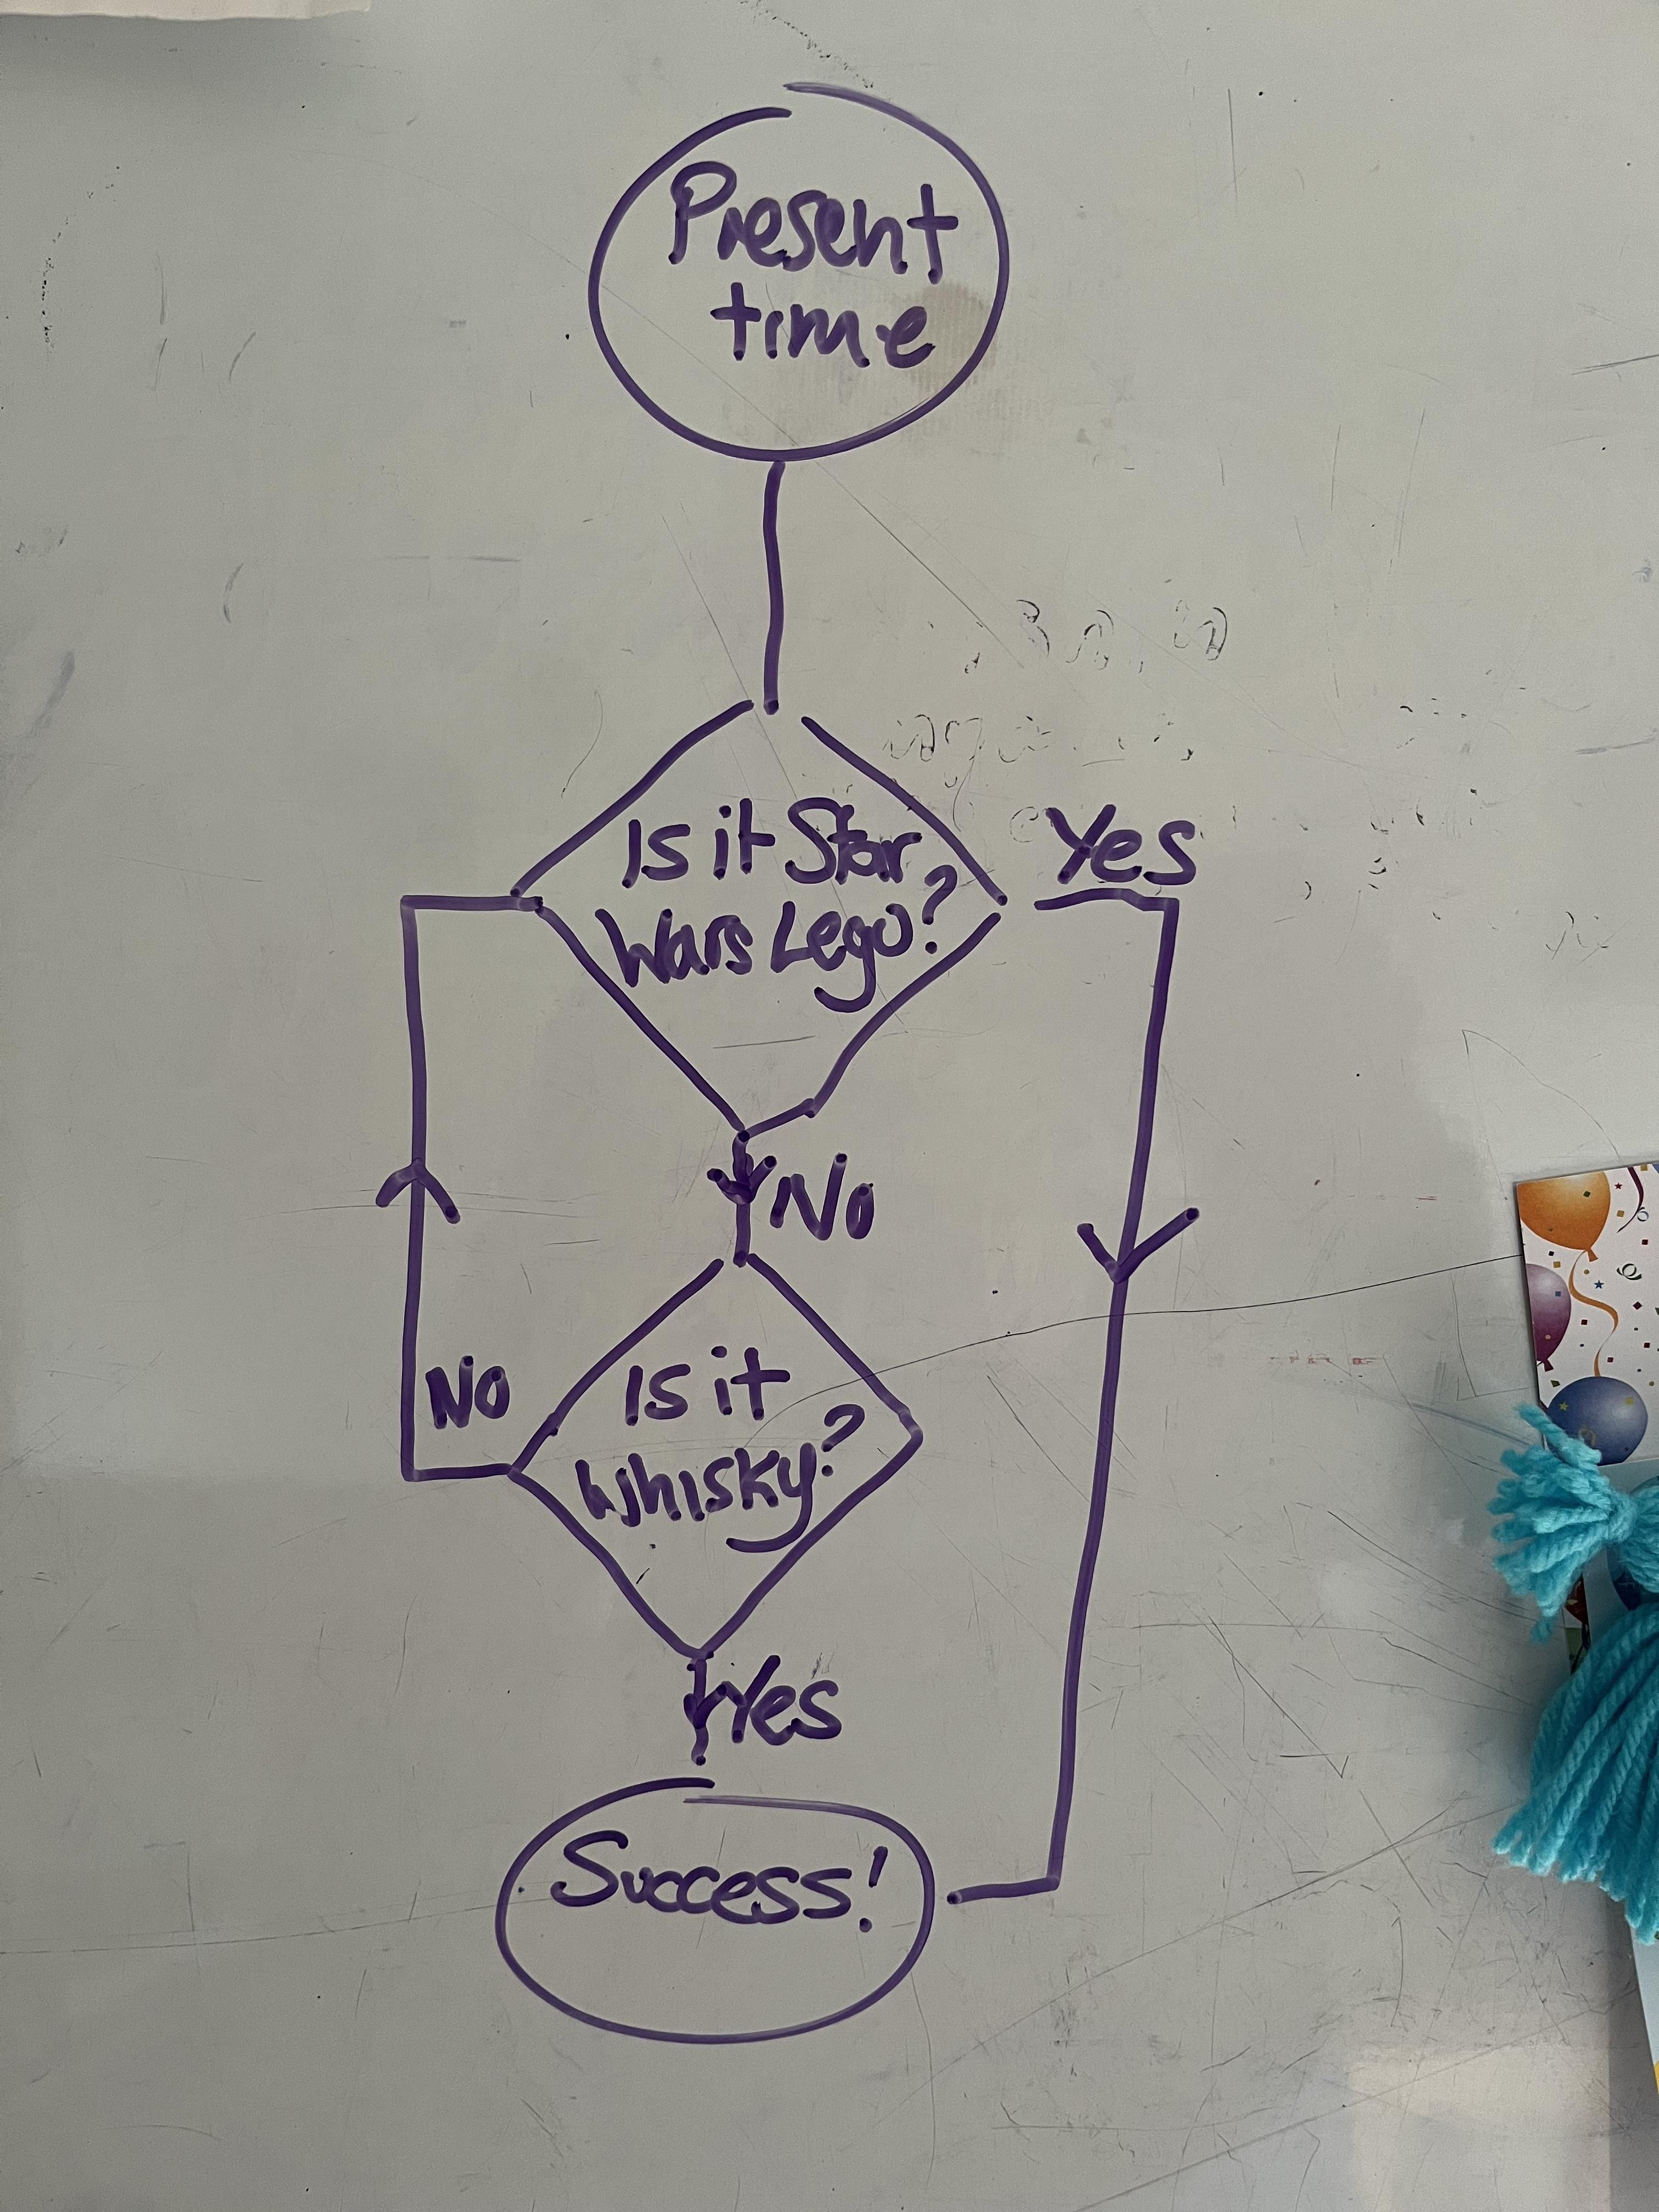 My wife says I’m difficult to buy presents for. So I made her a handy flowchart.